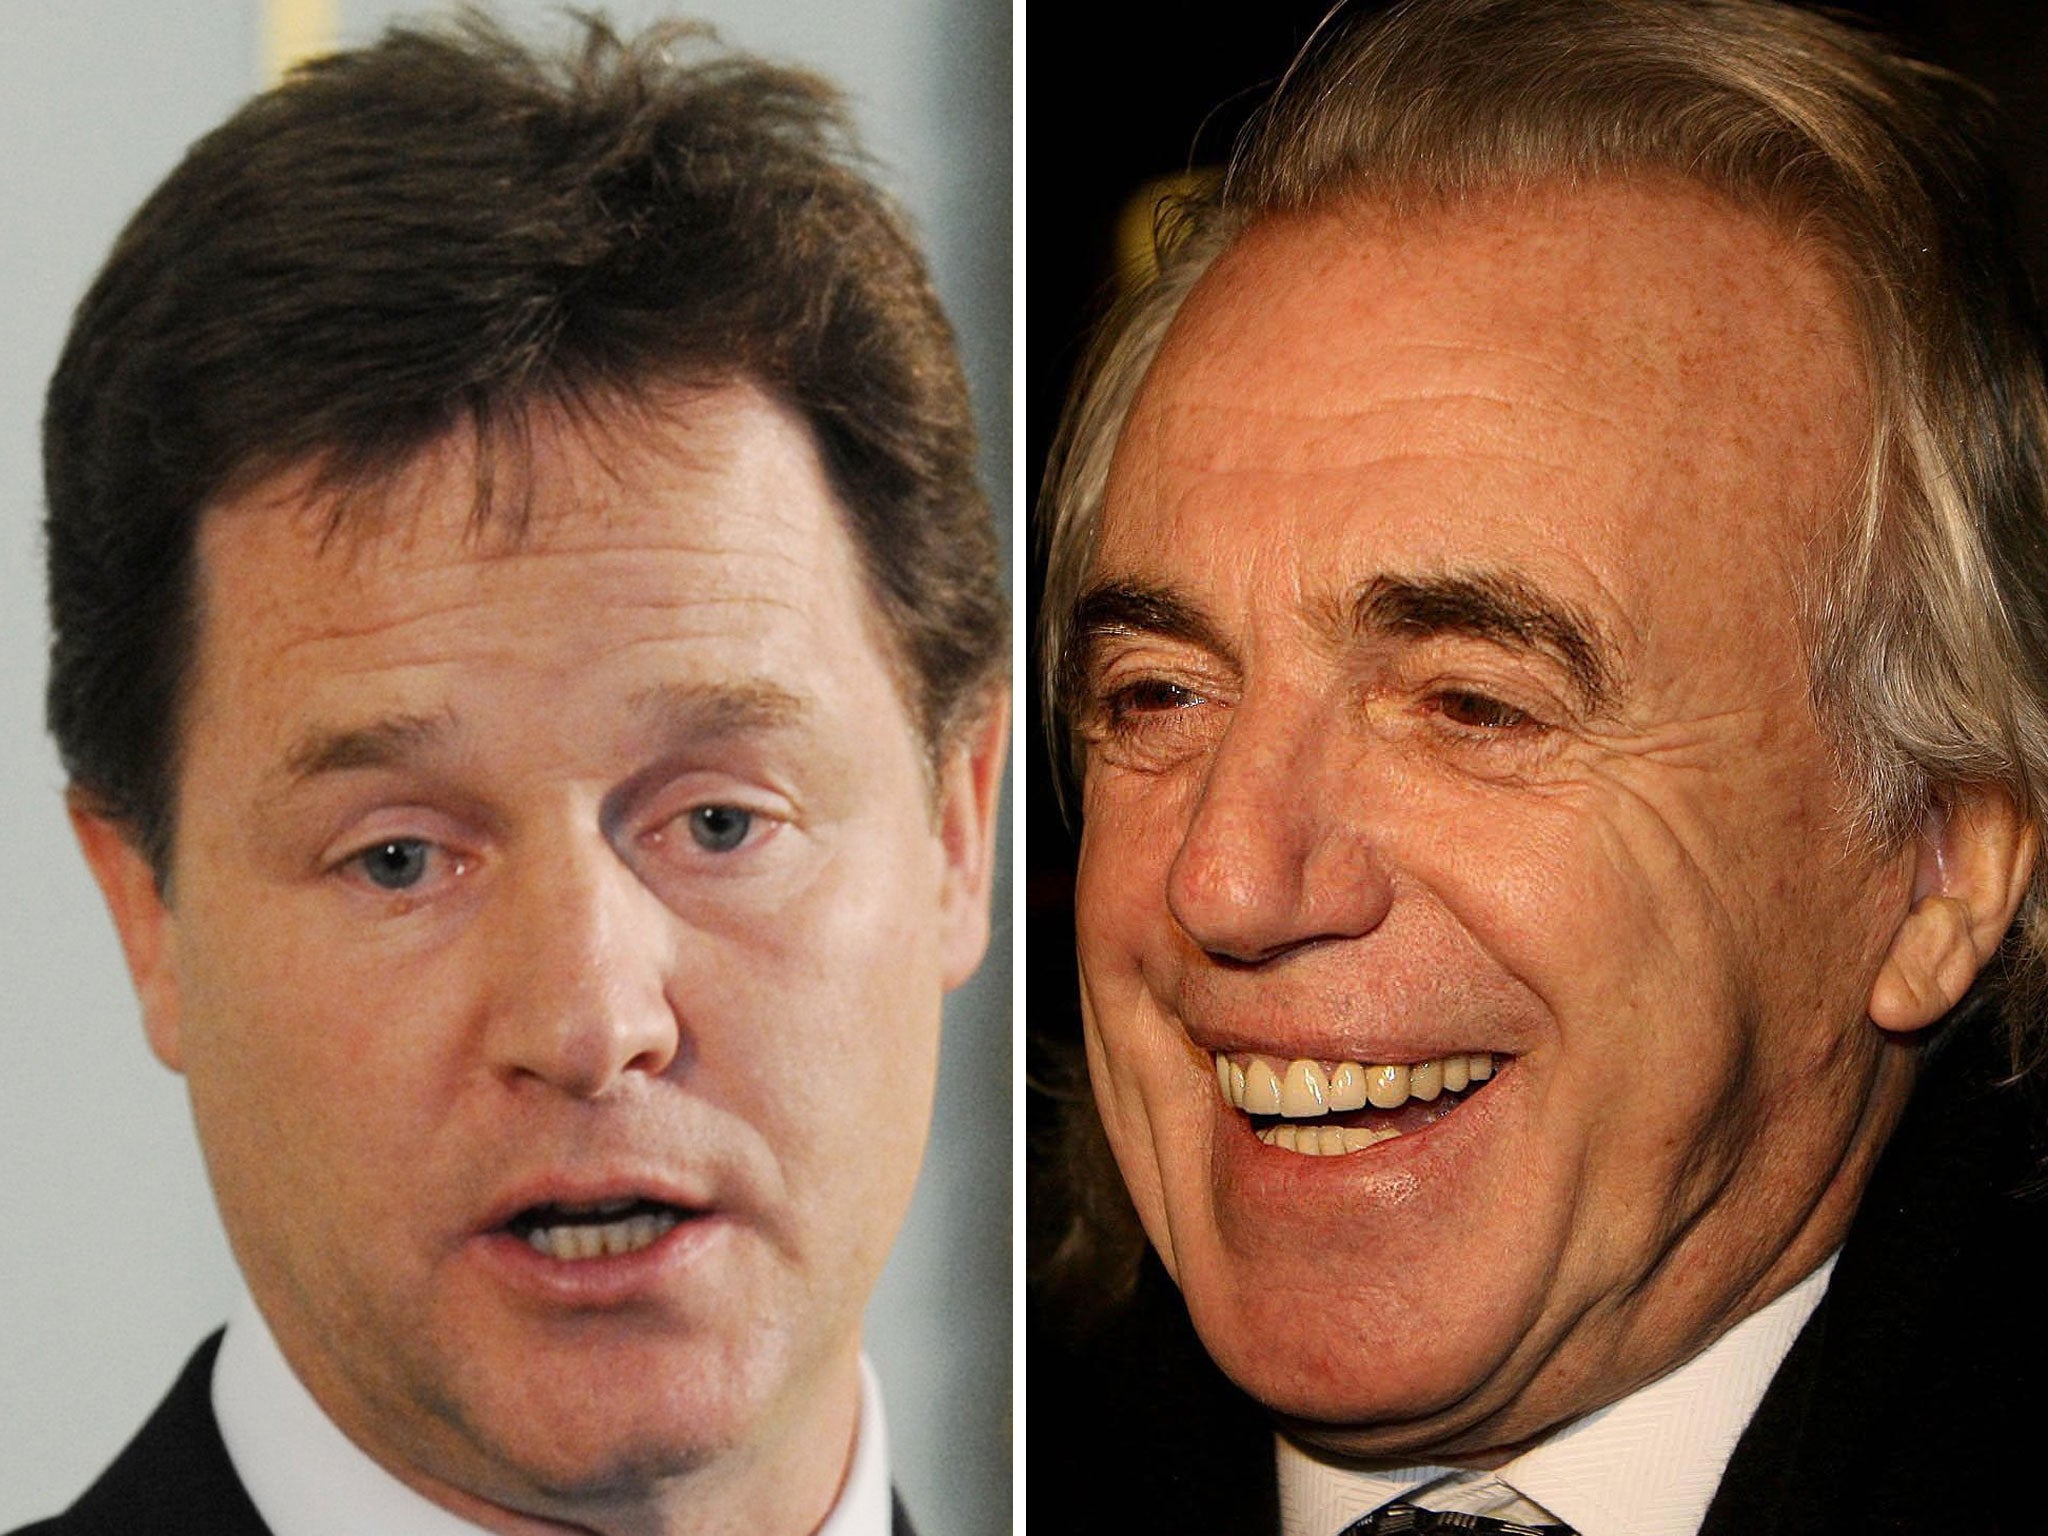 Peter Stringfellow has hinted that he may 'take on' Nick Clegg at the next General Election in 2015